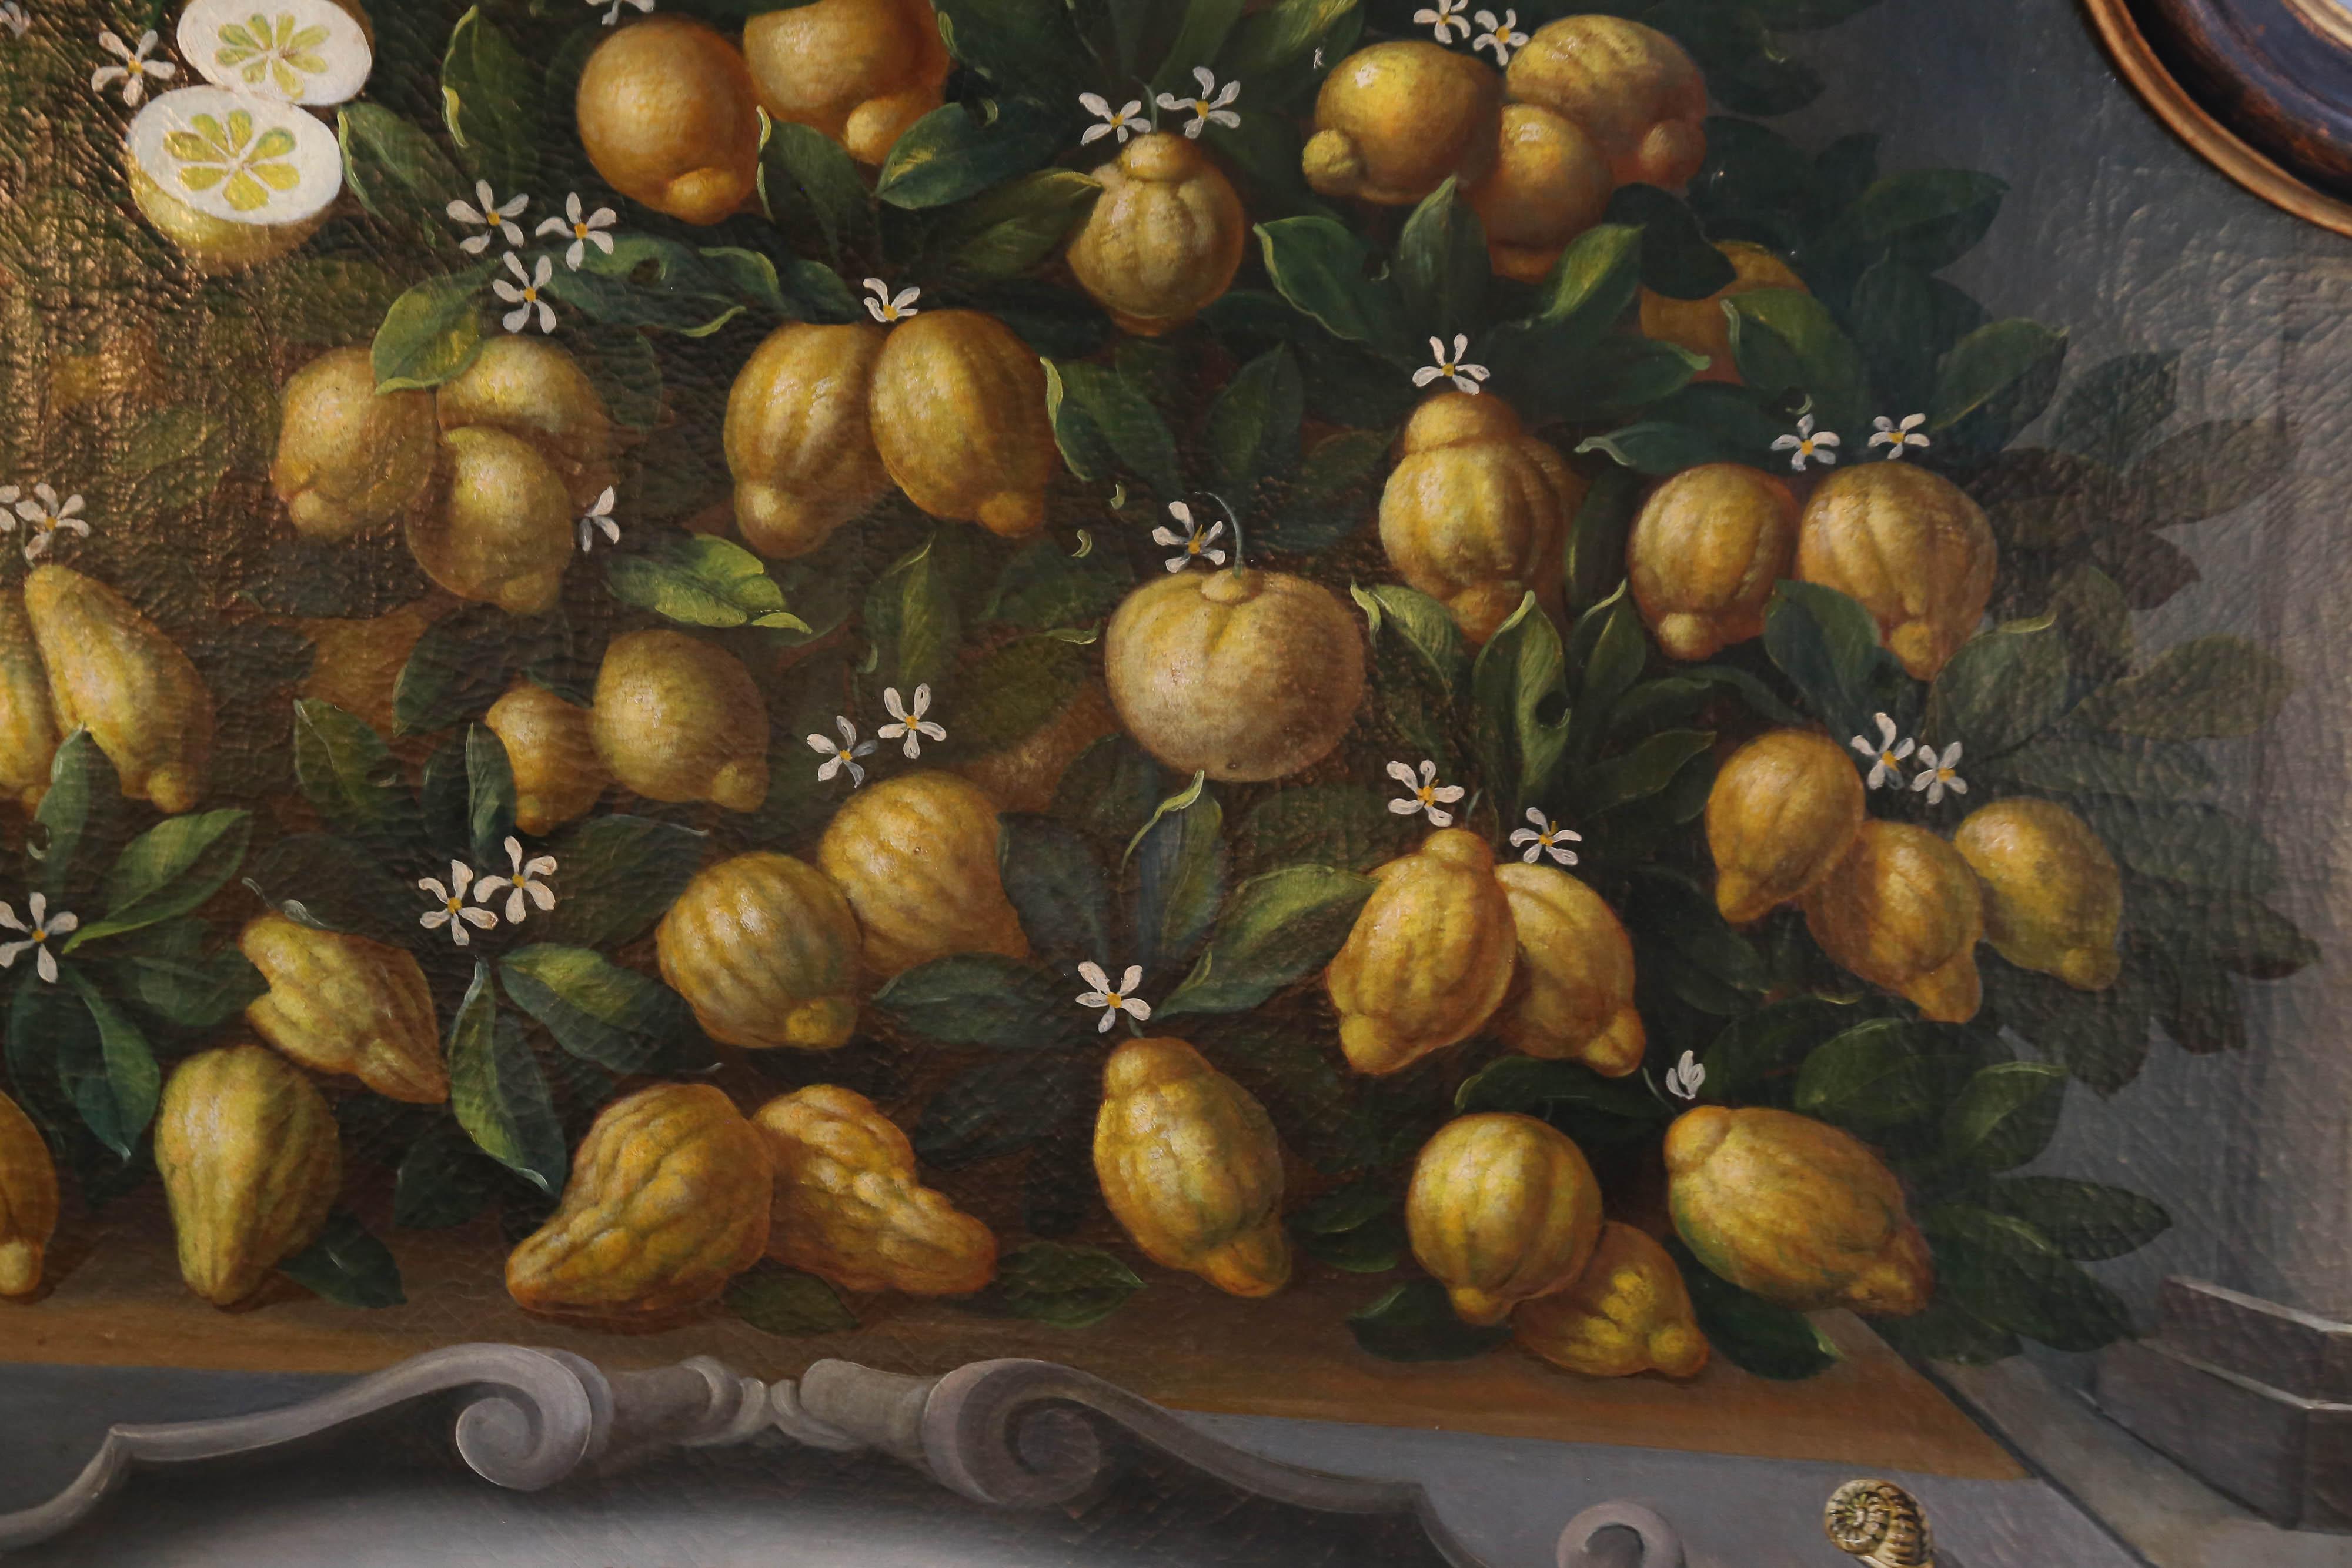 Painted panel in the Medici-style of the 17th century
features an over-abundance of ripe lemons and white lemon flowers.
